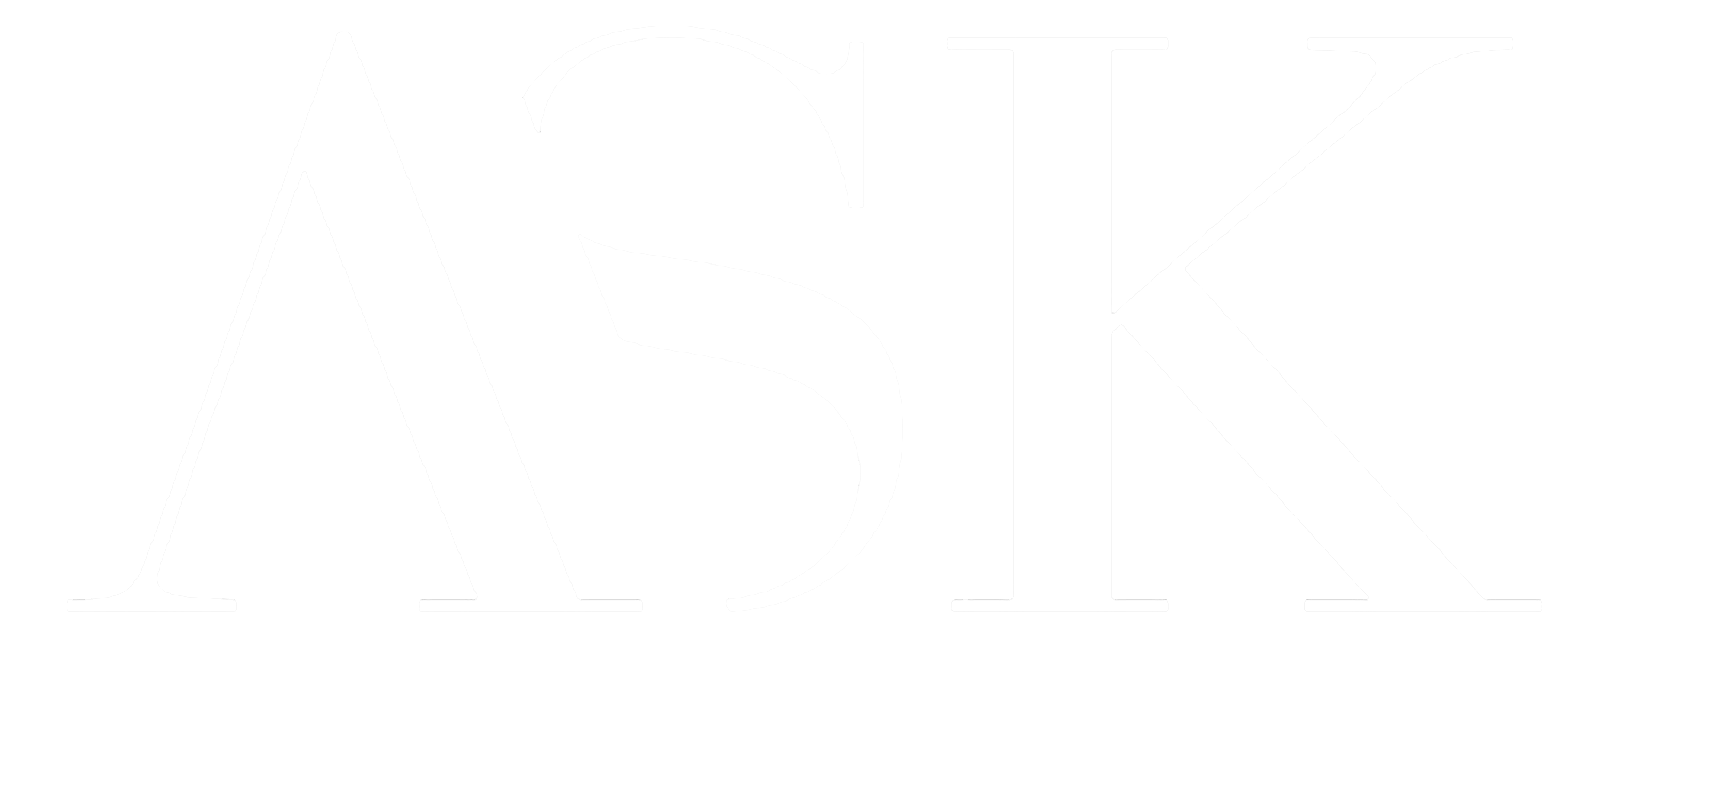 leicestershire accountance